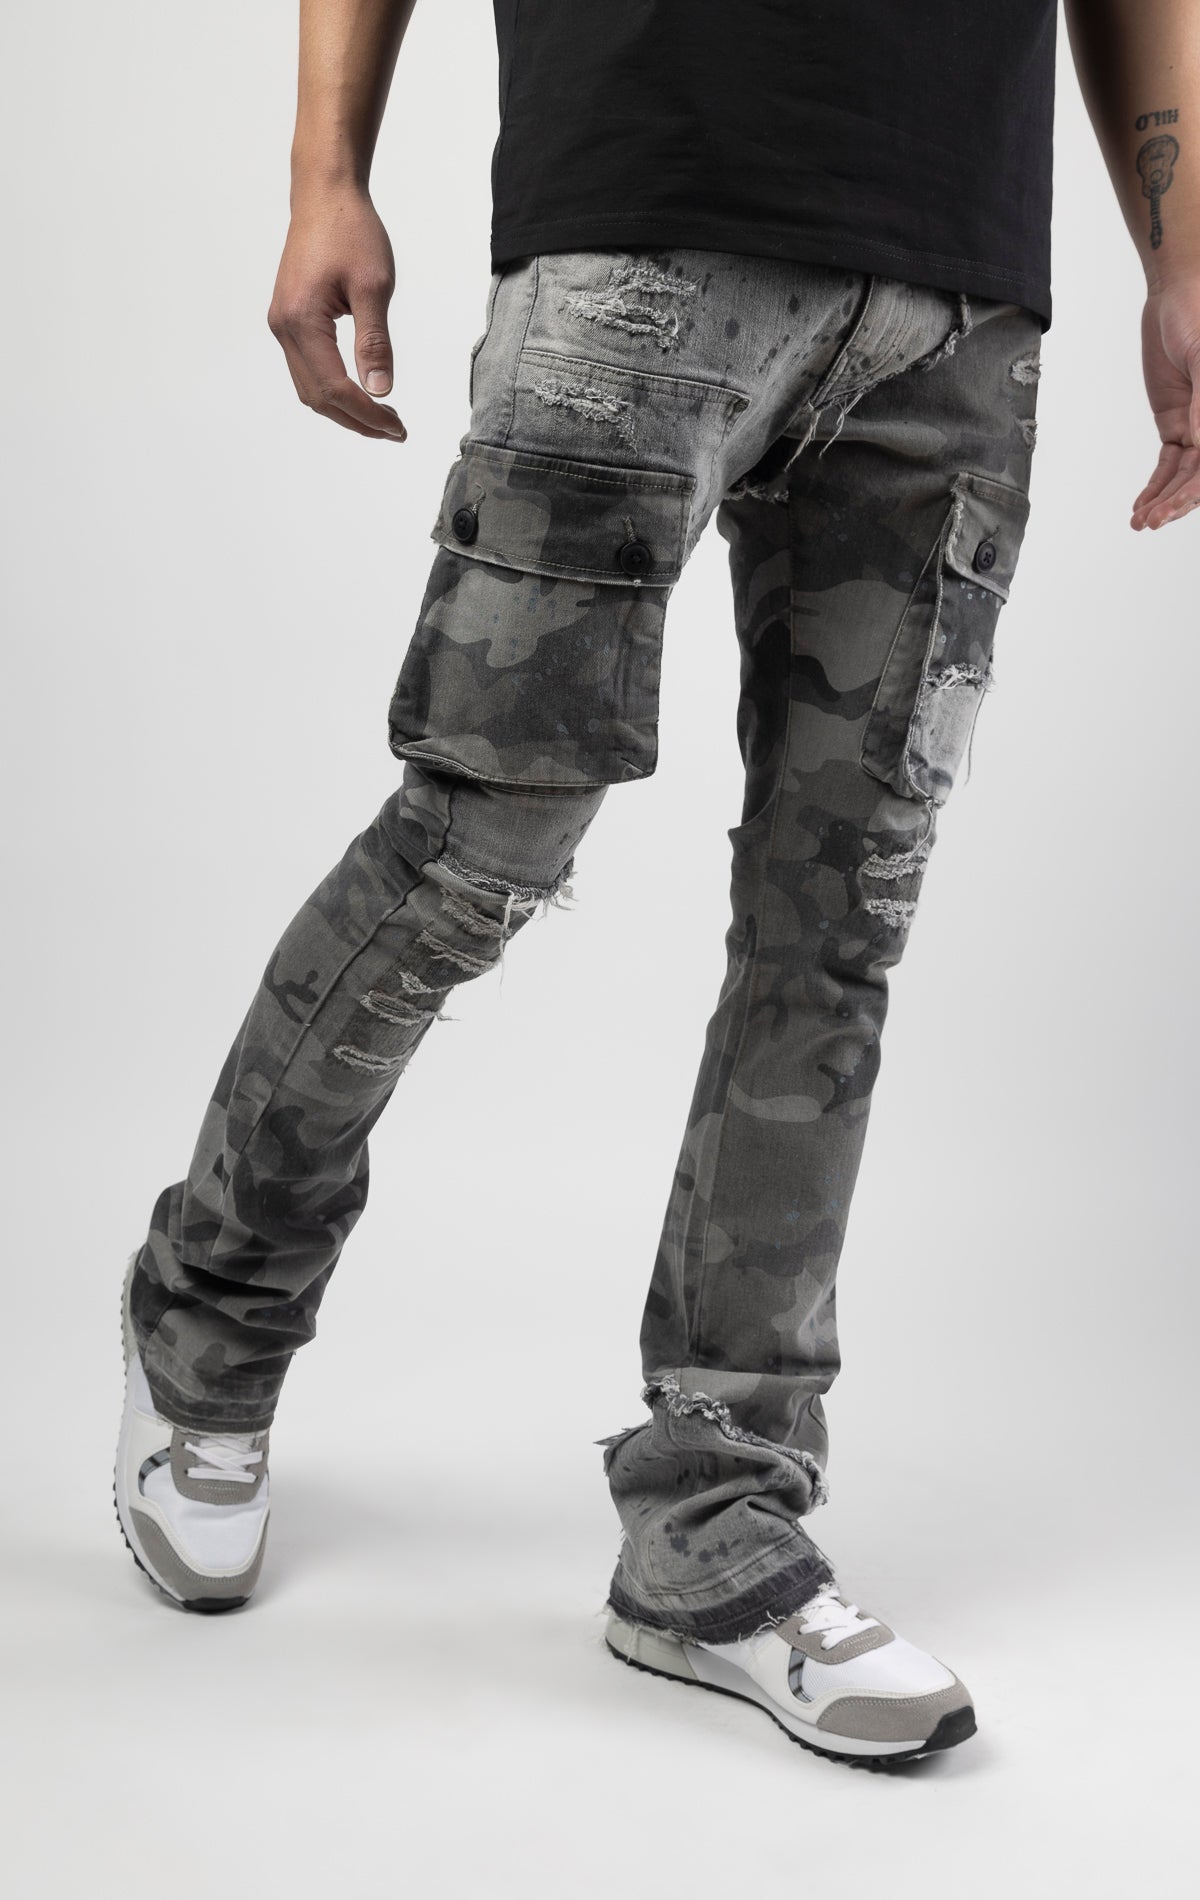 Overcast camo extended length flare pant with a regular rise for maximum stacks. Skinny fit with hand-smearing and speckled paint splatter throughout. Rip and repair detailing, accompanied by cut & sewn woodland camouflage twill patches. Stitching repairs and deep front pocket bags, perfect for large smart phones.